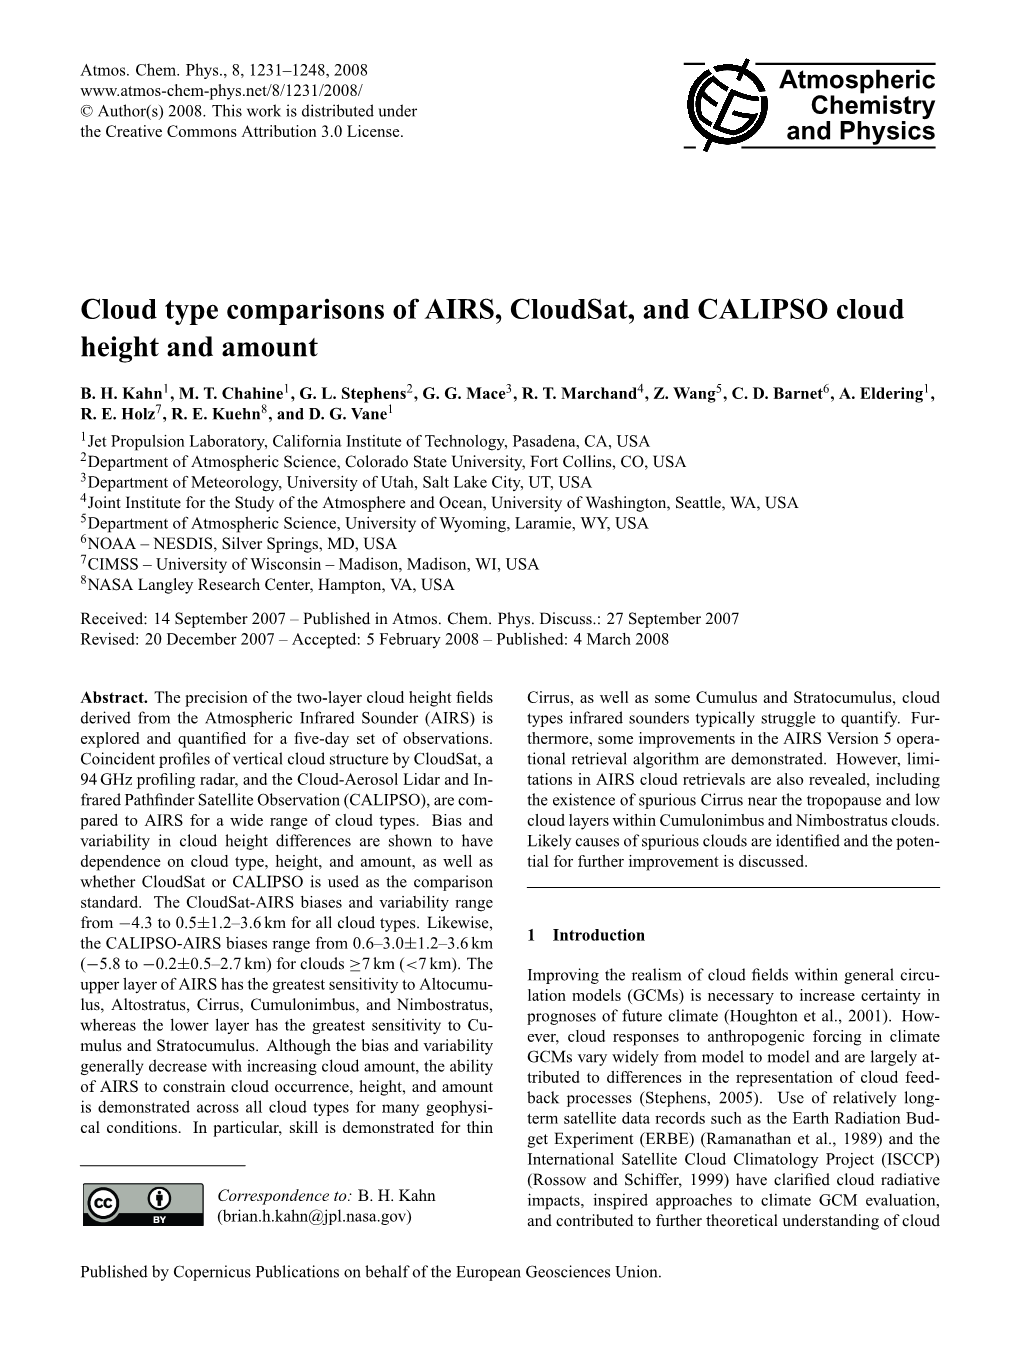 Cloud Type Comparisons of AIRS, Cloudsat, and CALIPSO Cloud Height and Amount